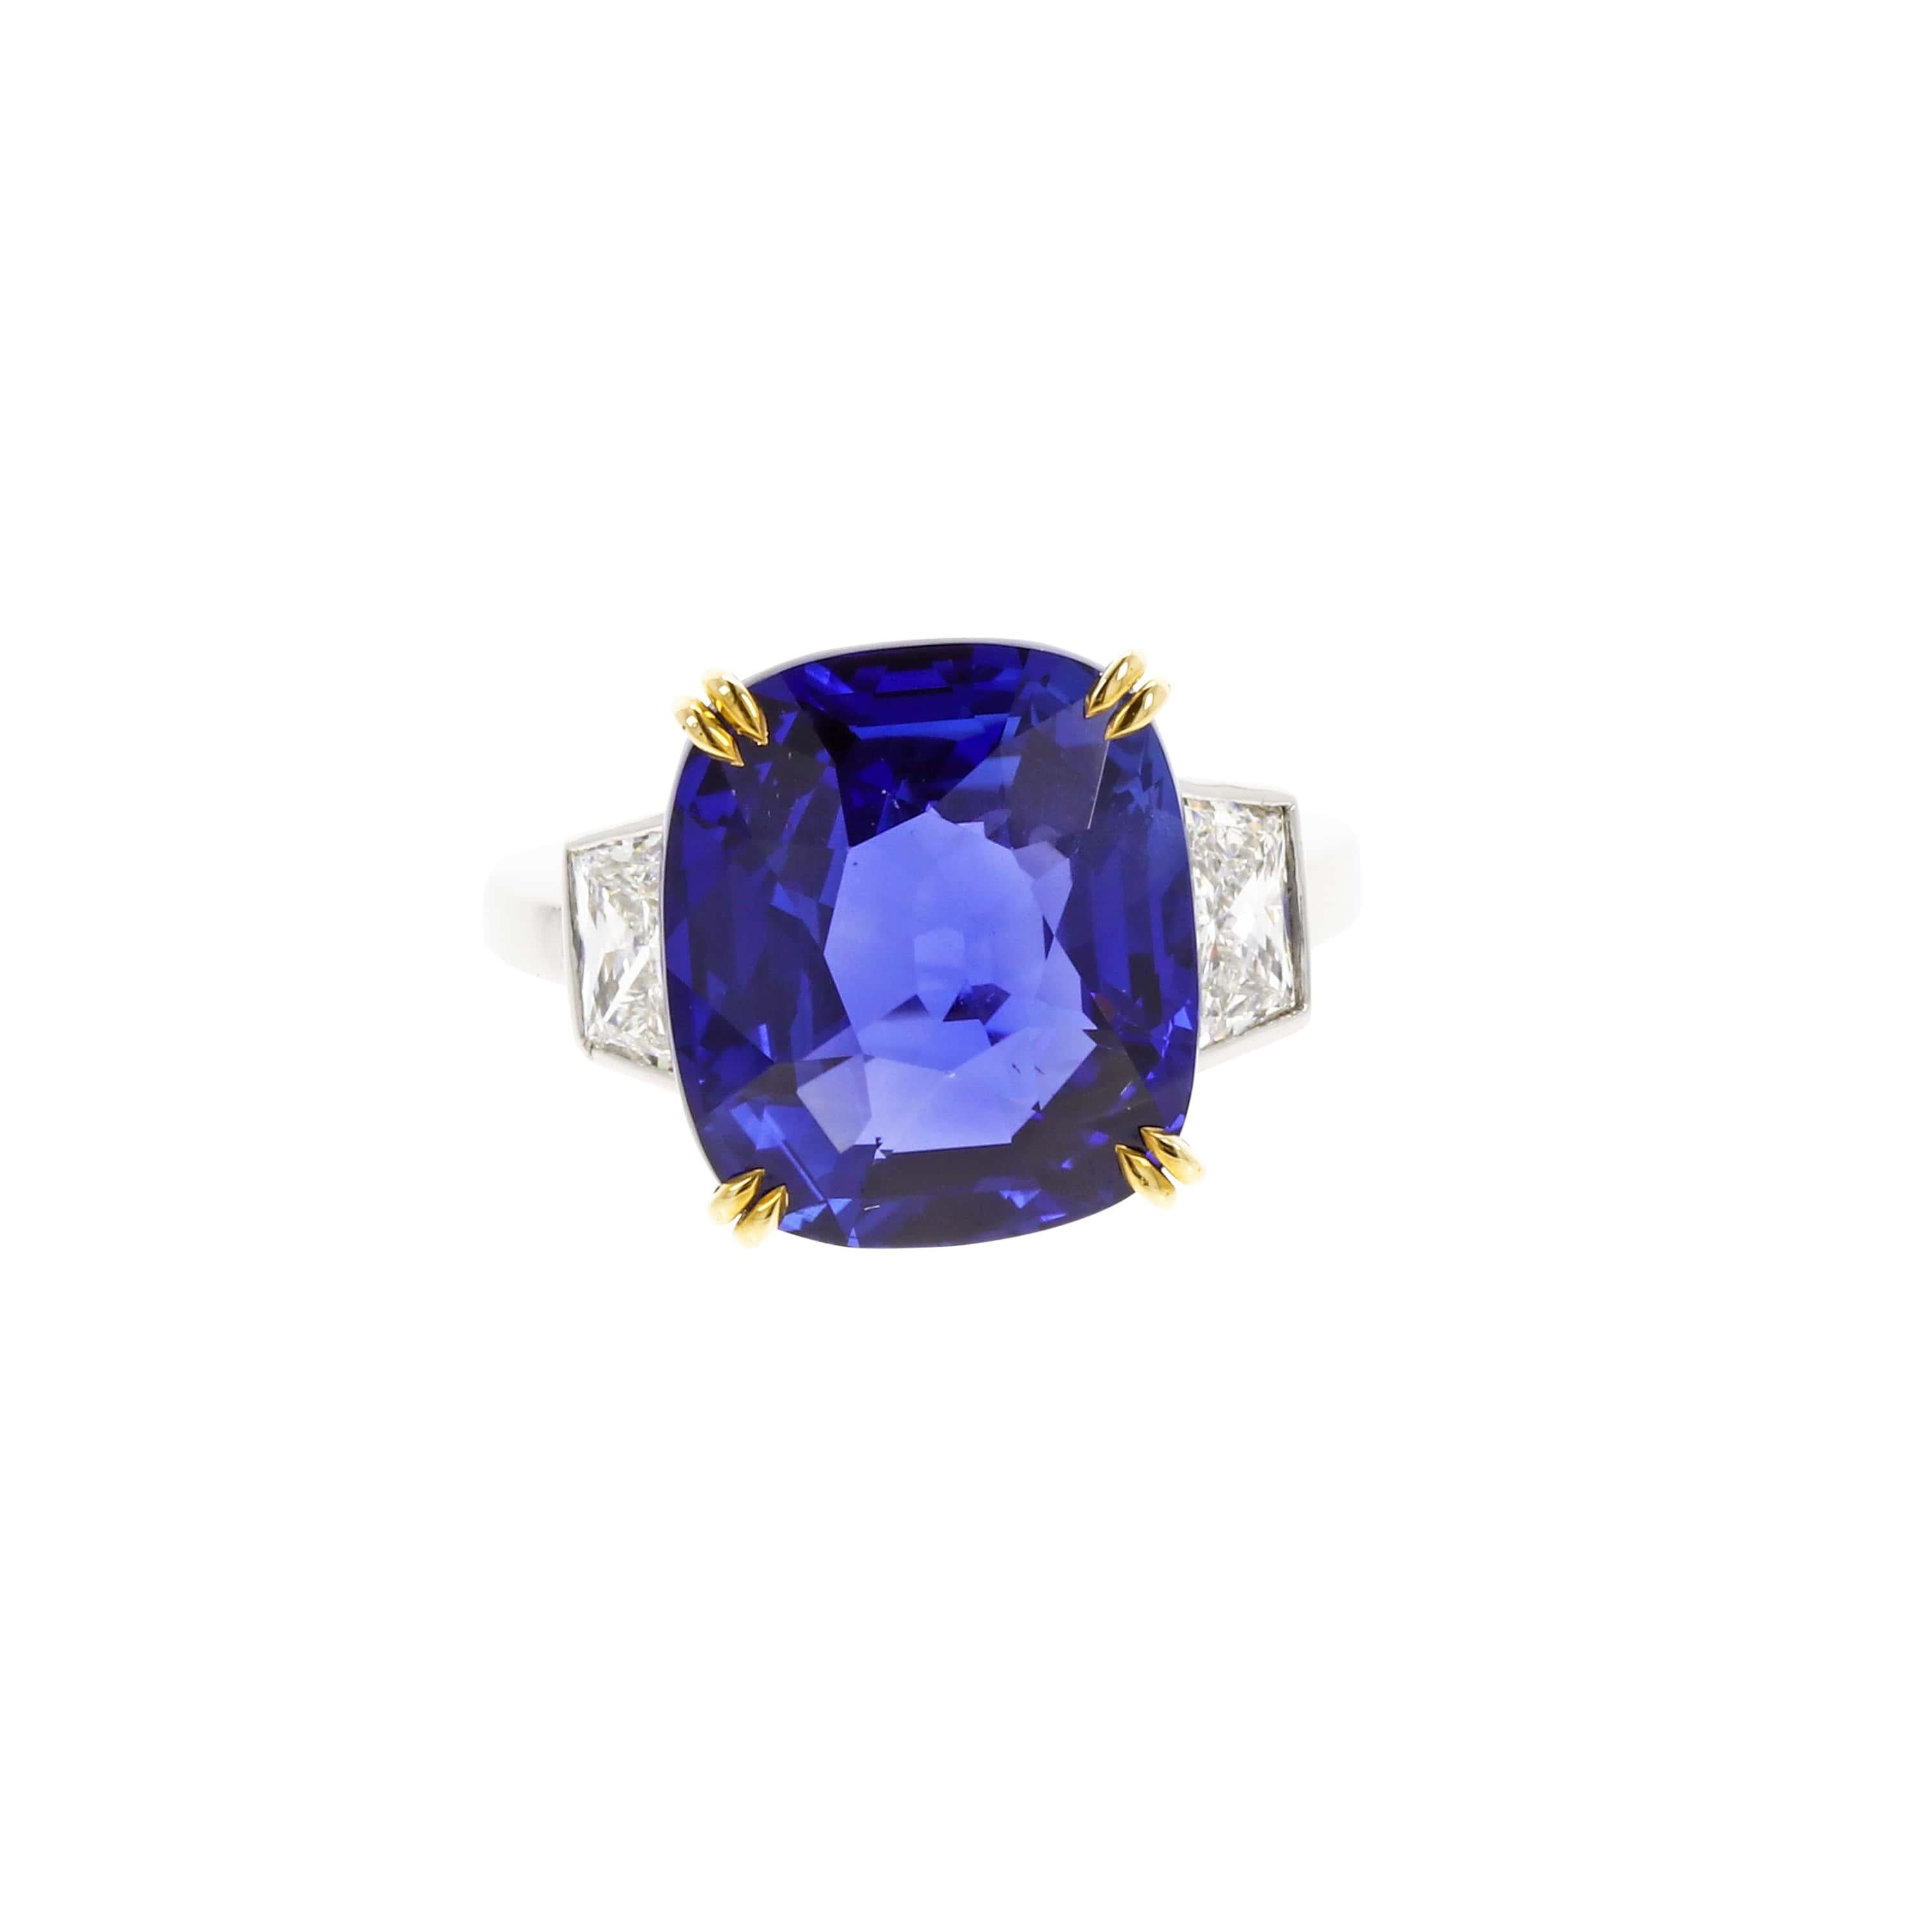 Featuring a superb sapphire, weighing 14.82 carats, flanked by two tapered baguette diamonds weighing approximately 1.50 carats in total. Accompanied by a SSEF gemological report stating that the sapphire is natural, of Ceylon (Sri Lankan) origin,